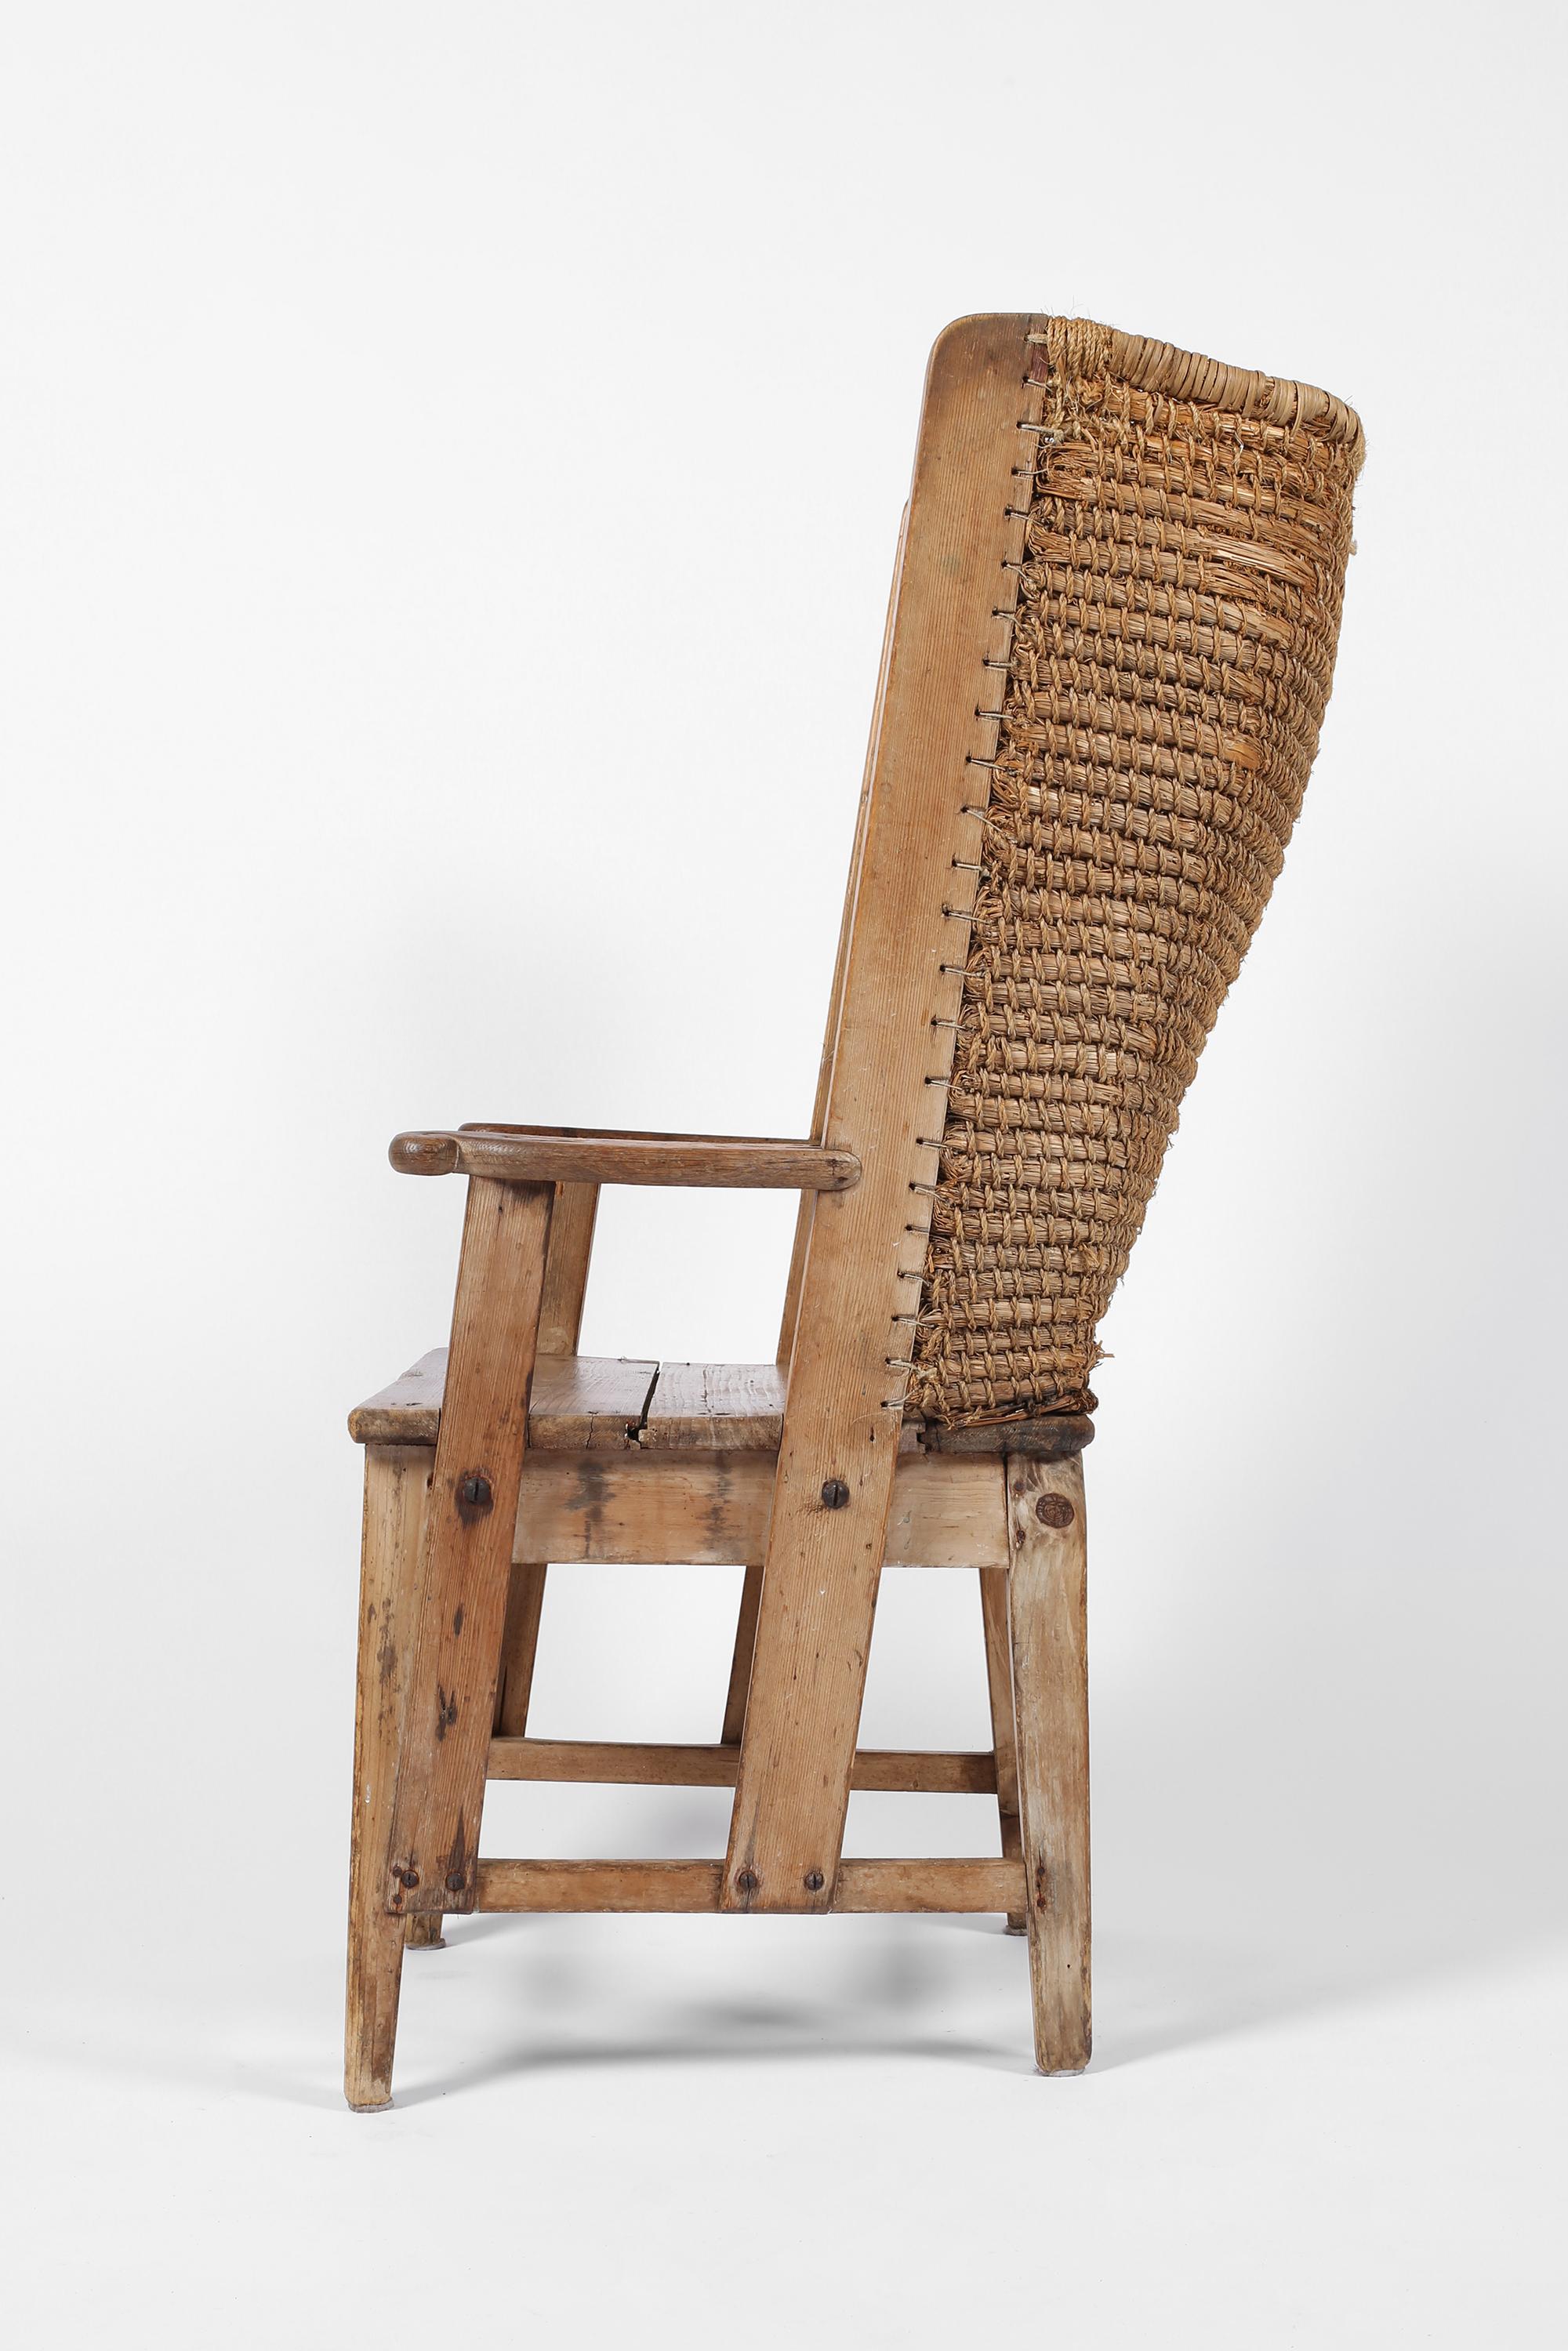 Late 19th Century Scottish Vernacular Pine and Woven Straw Orkney Chair 11